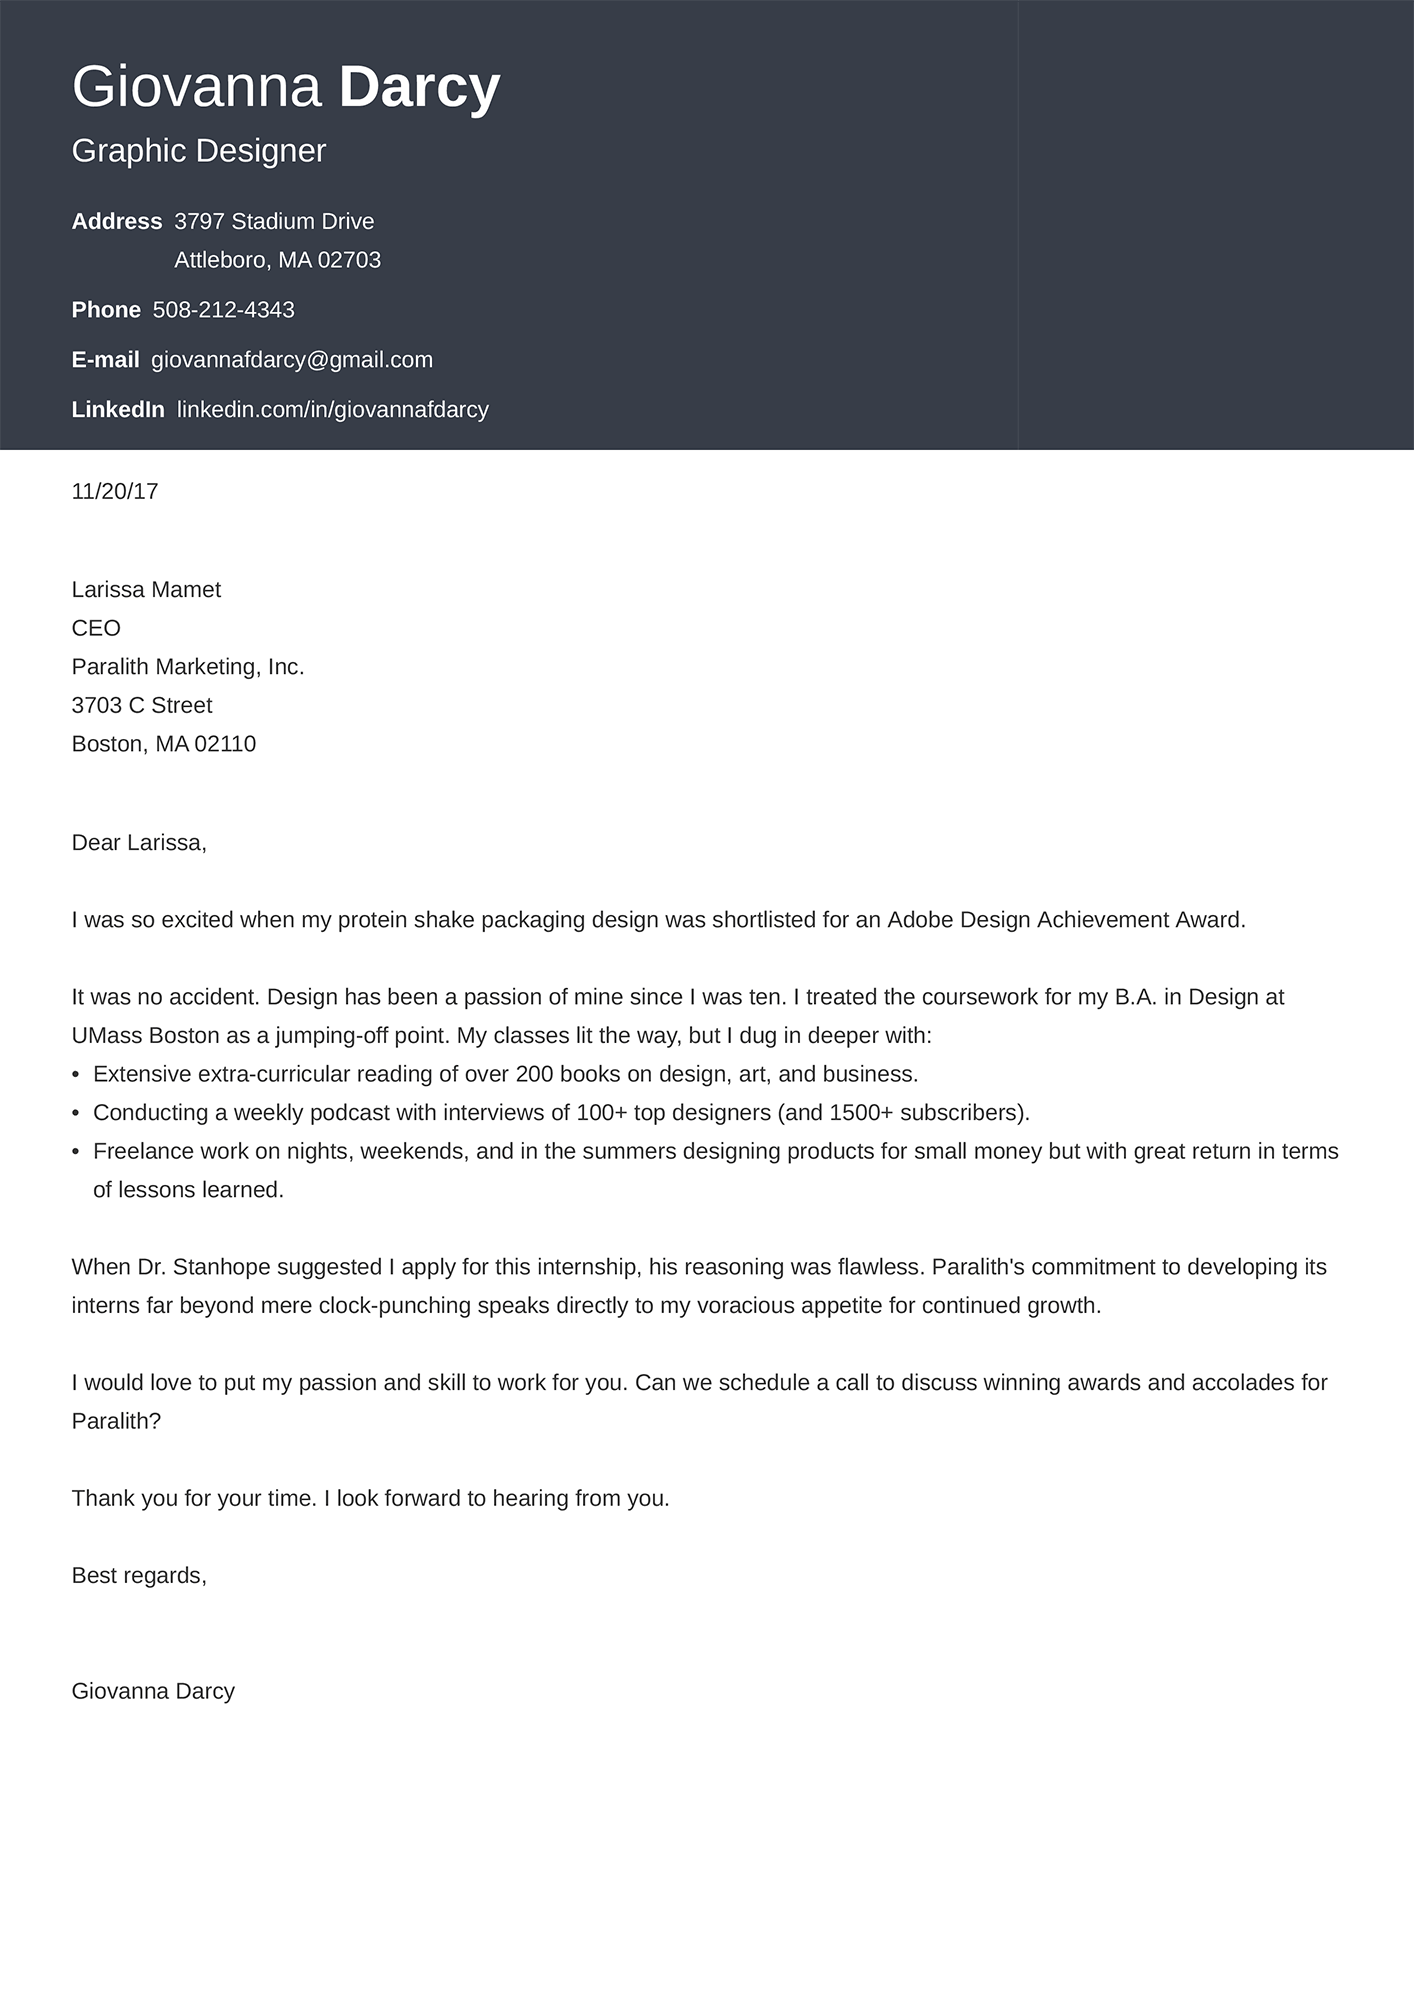 Internship Cover Letter Format from cdn-images.zety.com